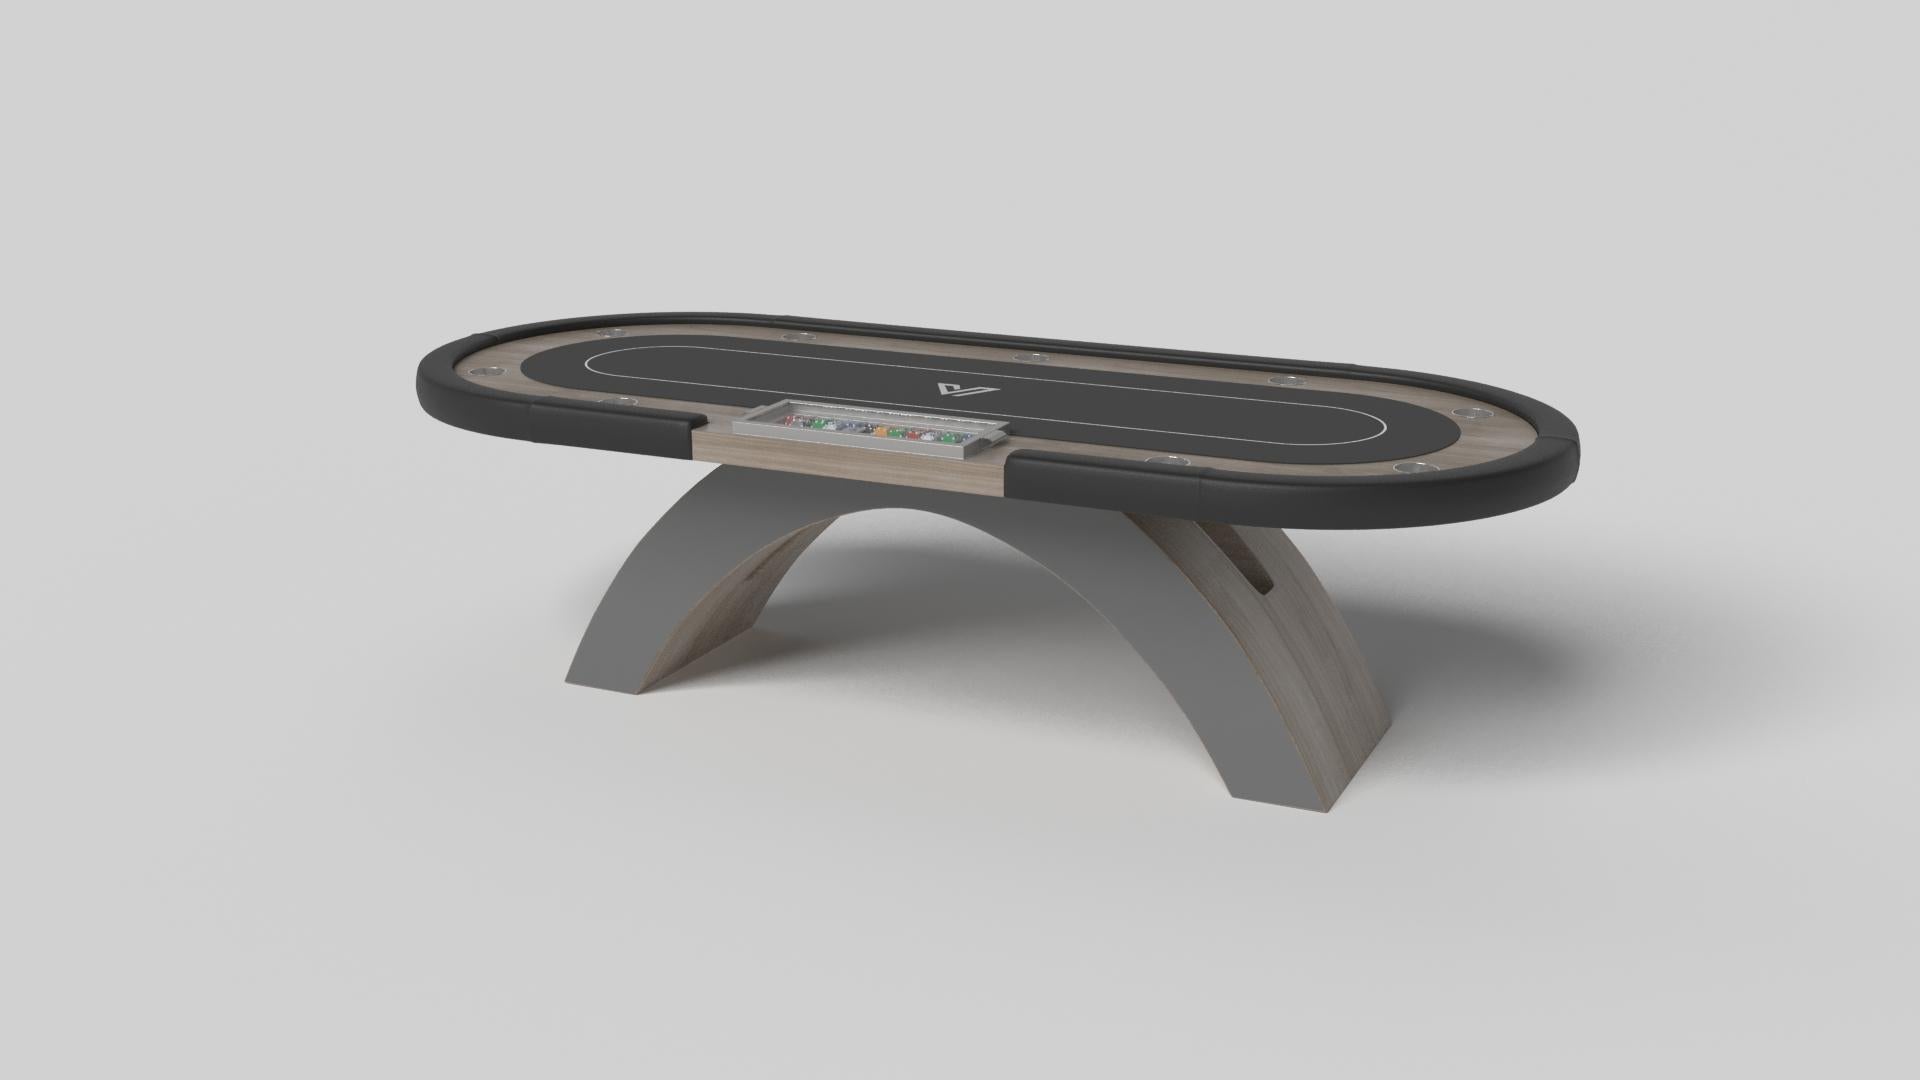 An open, arched base balances beautifully against the rounded edges of the oval surface top, making the Zenith poker table in black with red a striking combination of modern, geometric forms. Minimalist in its appeal yet luxurious in design, this